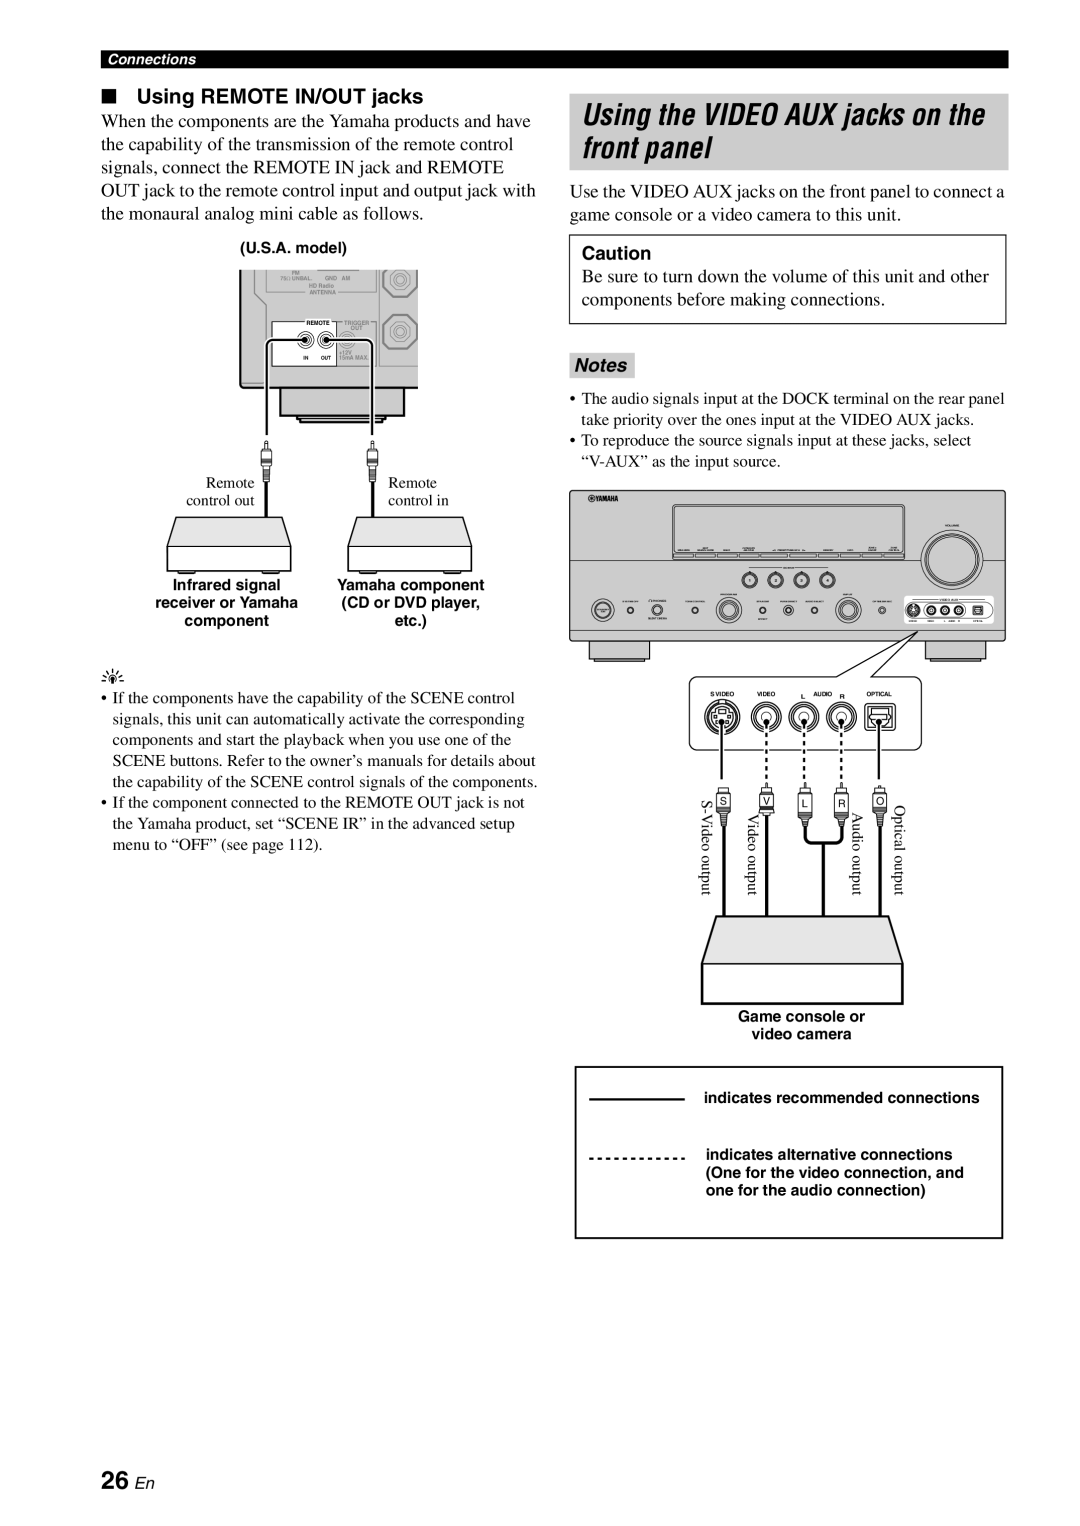 Yamaha RX-V863 owner manual Using the VIDEO AUX jacks on the front panel, 26 En, Using REMOTE IN/OUT jacks 